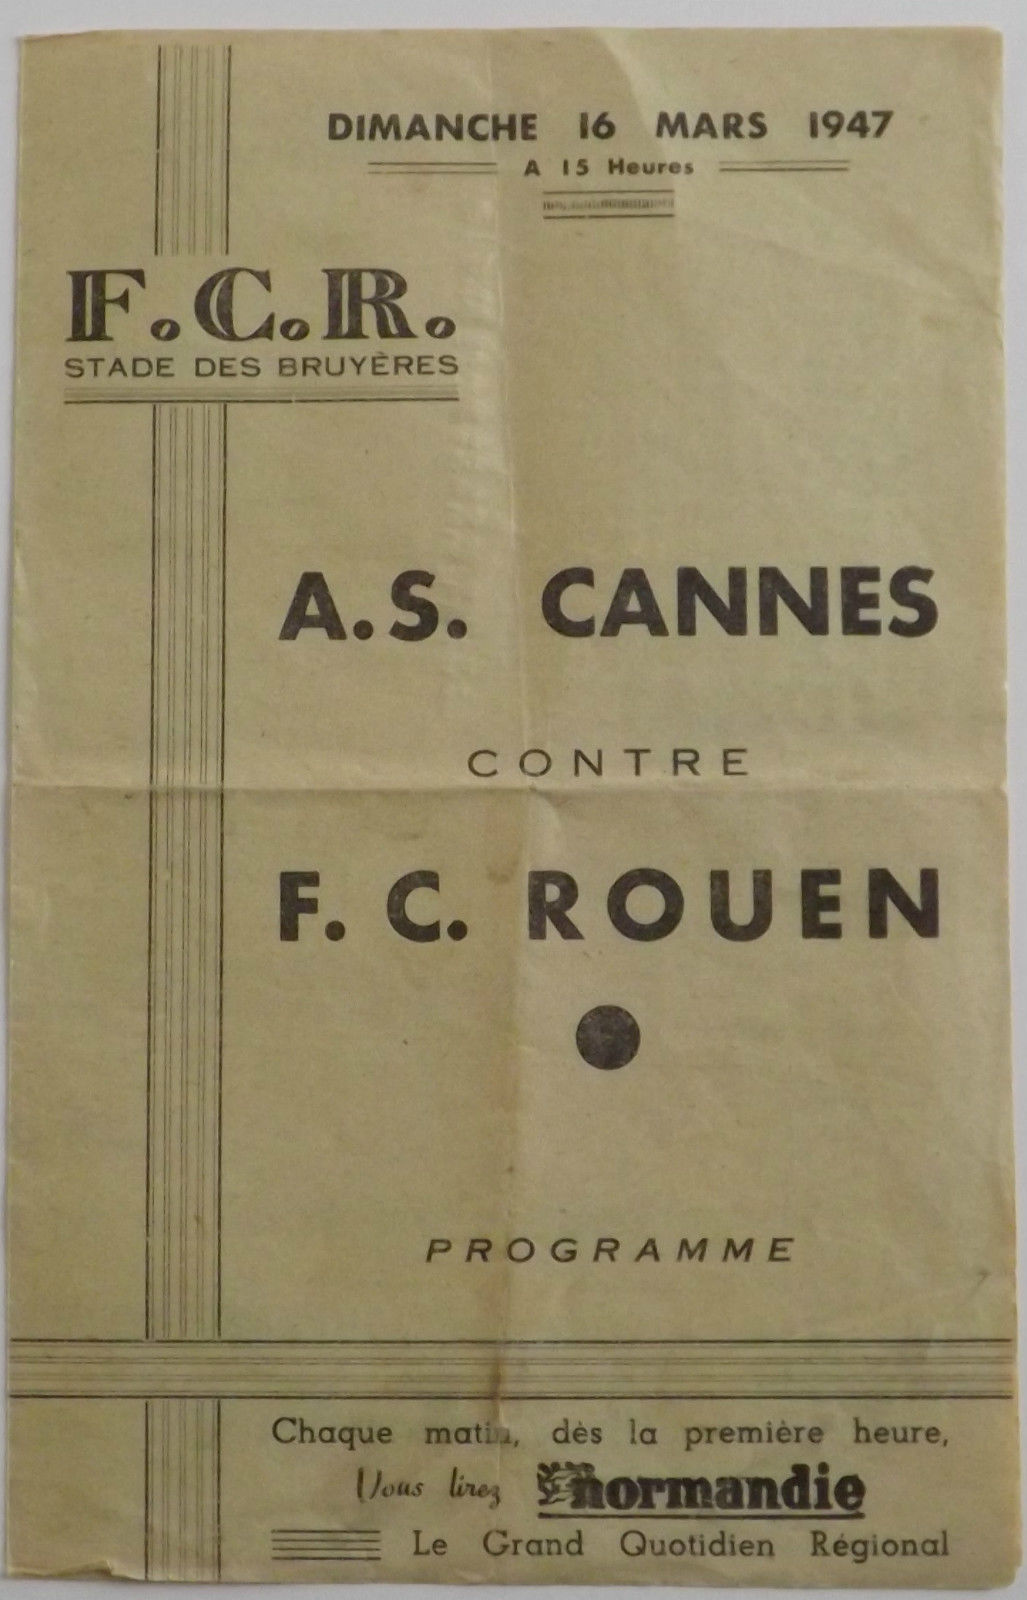 Programme-FCR-Cannes-mars1947